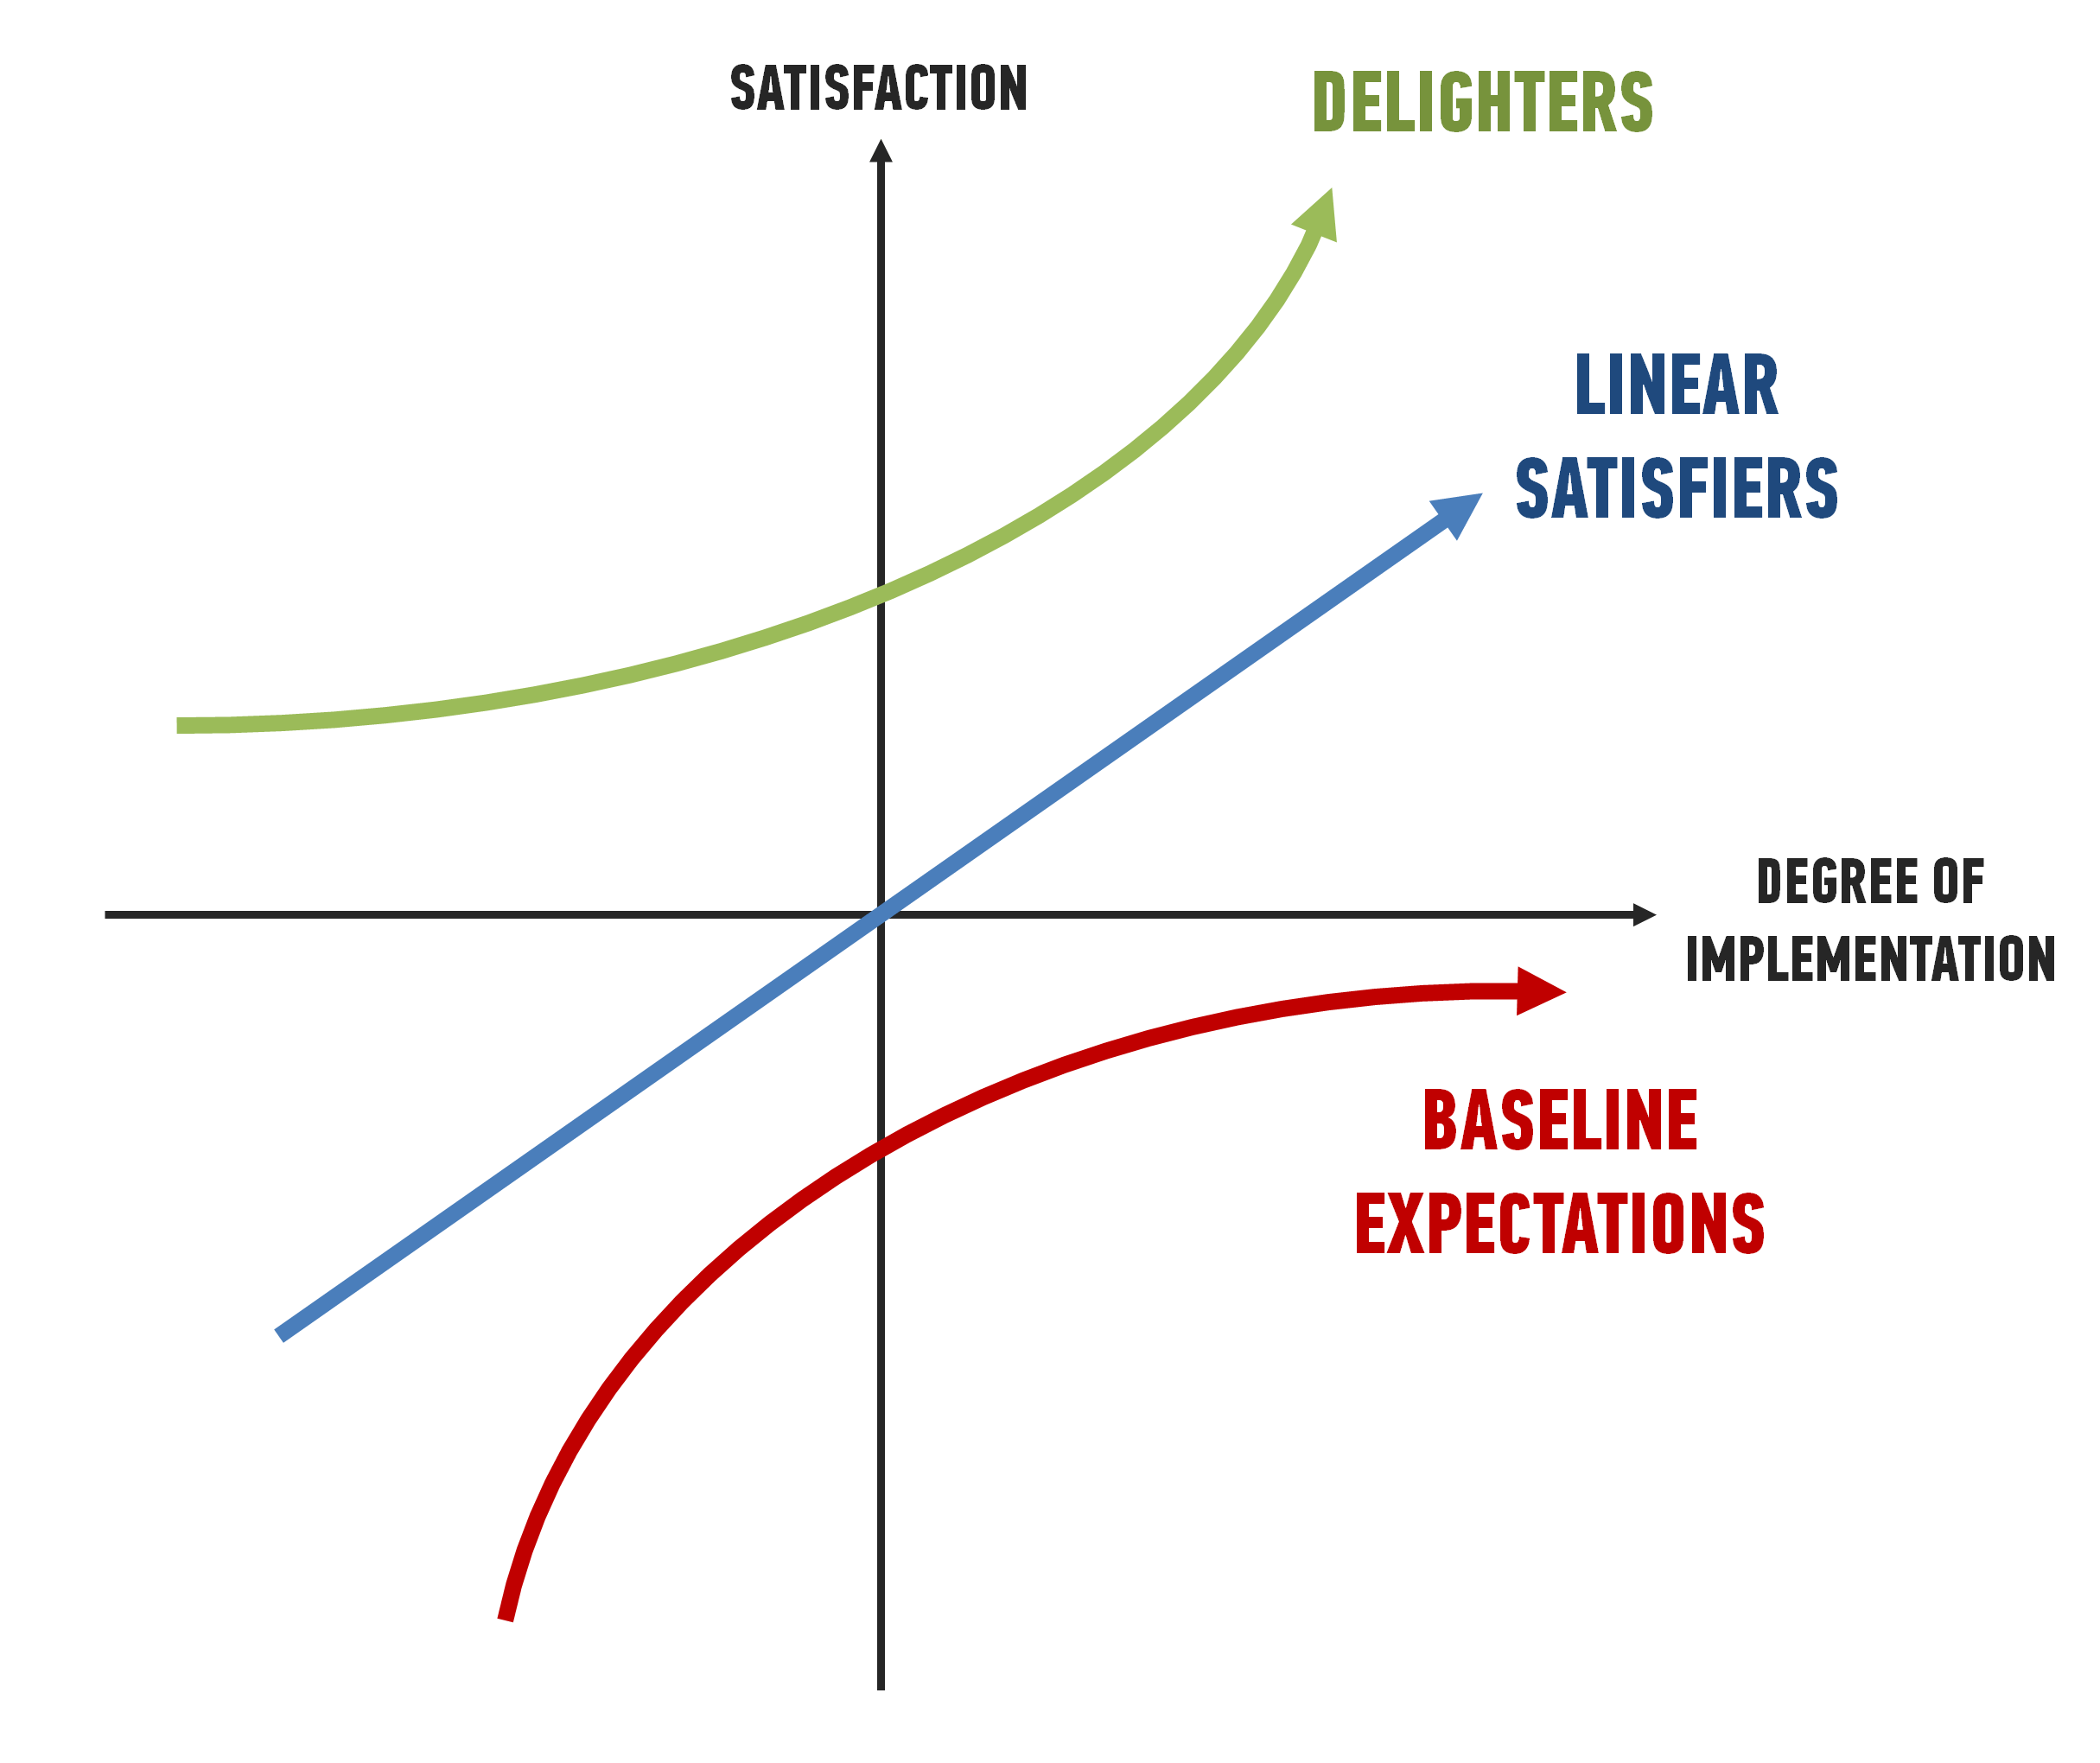 37: Unexpected delights a geek s guide to the Kano model I Manage